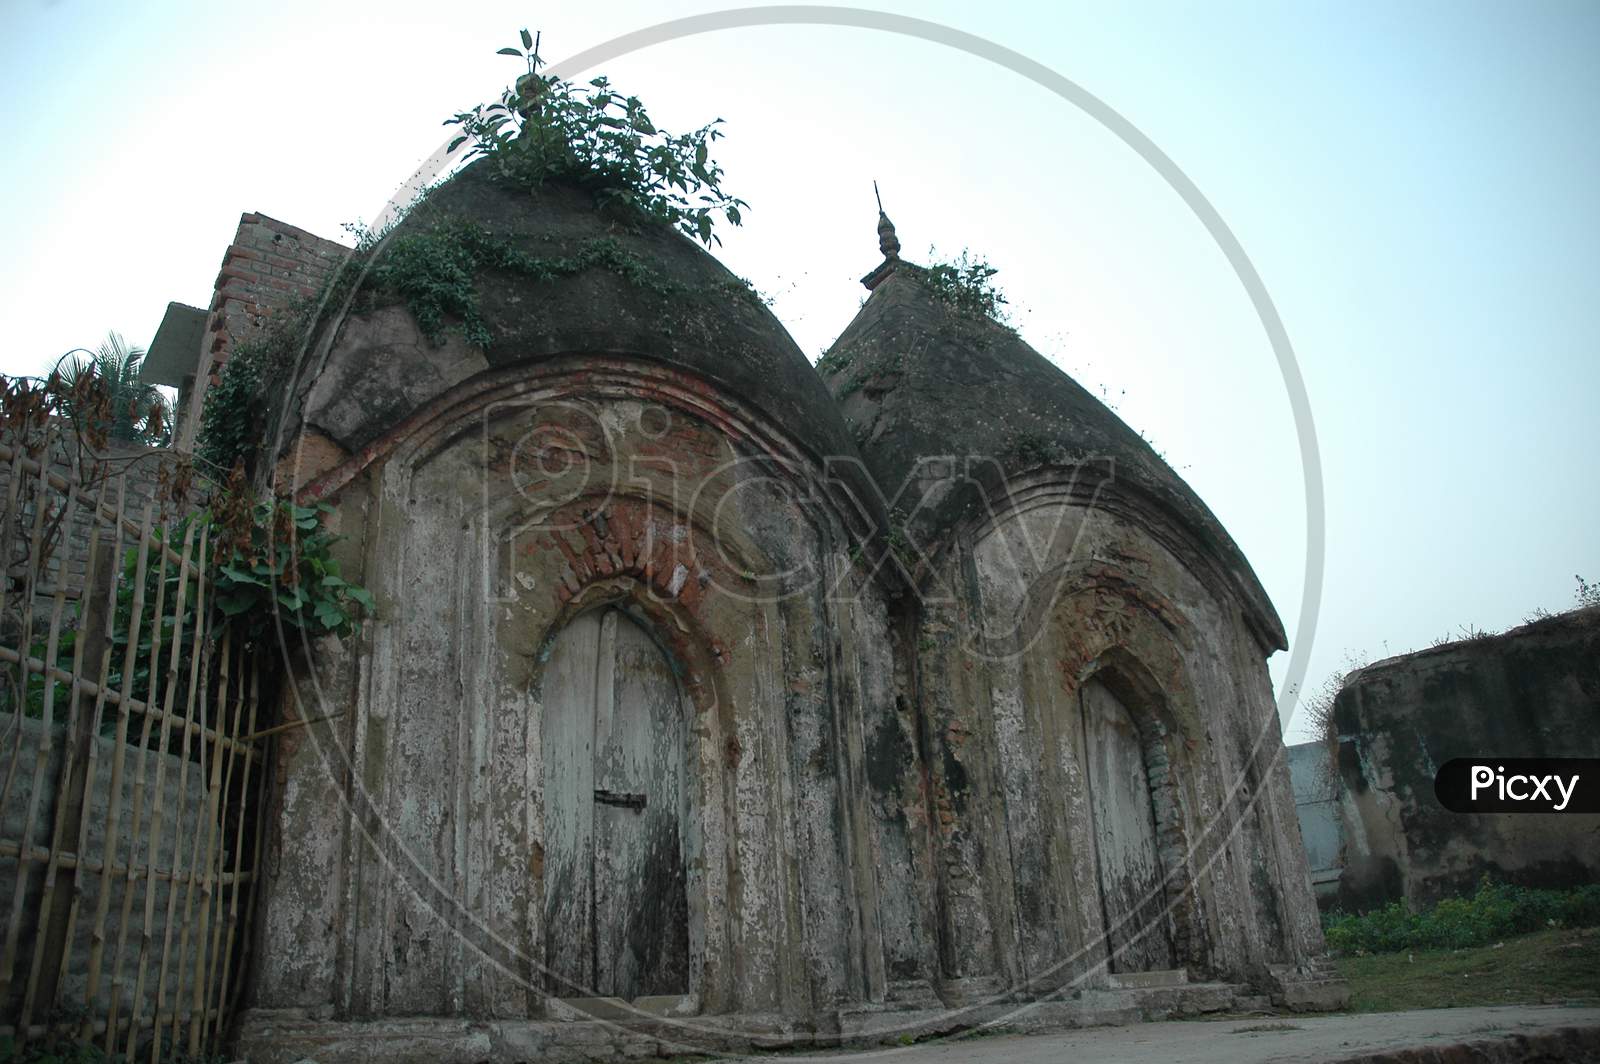 Ancient ruins of a Mosque in Murshidabad